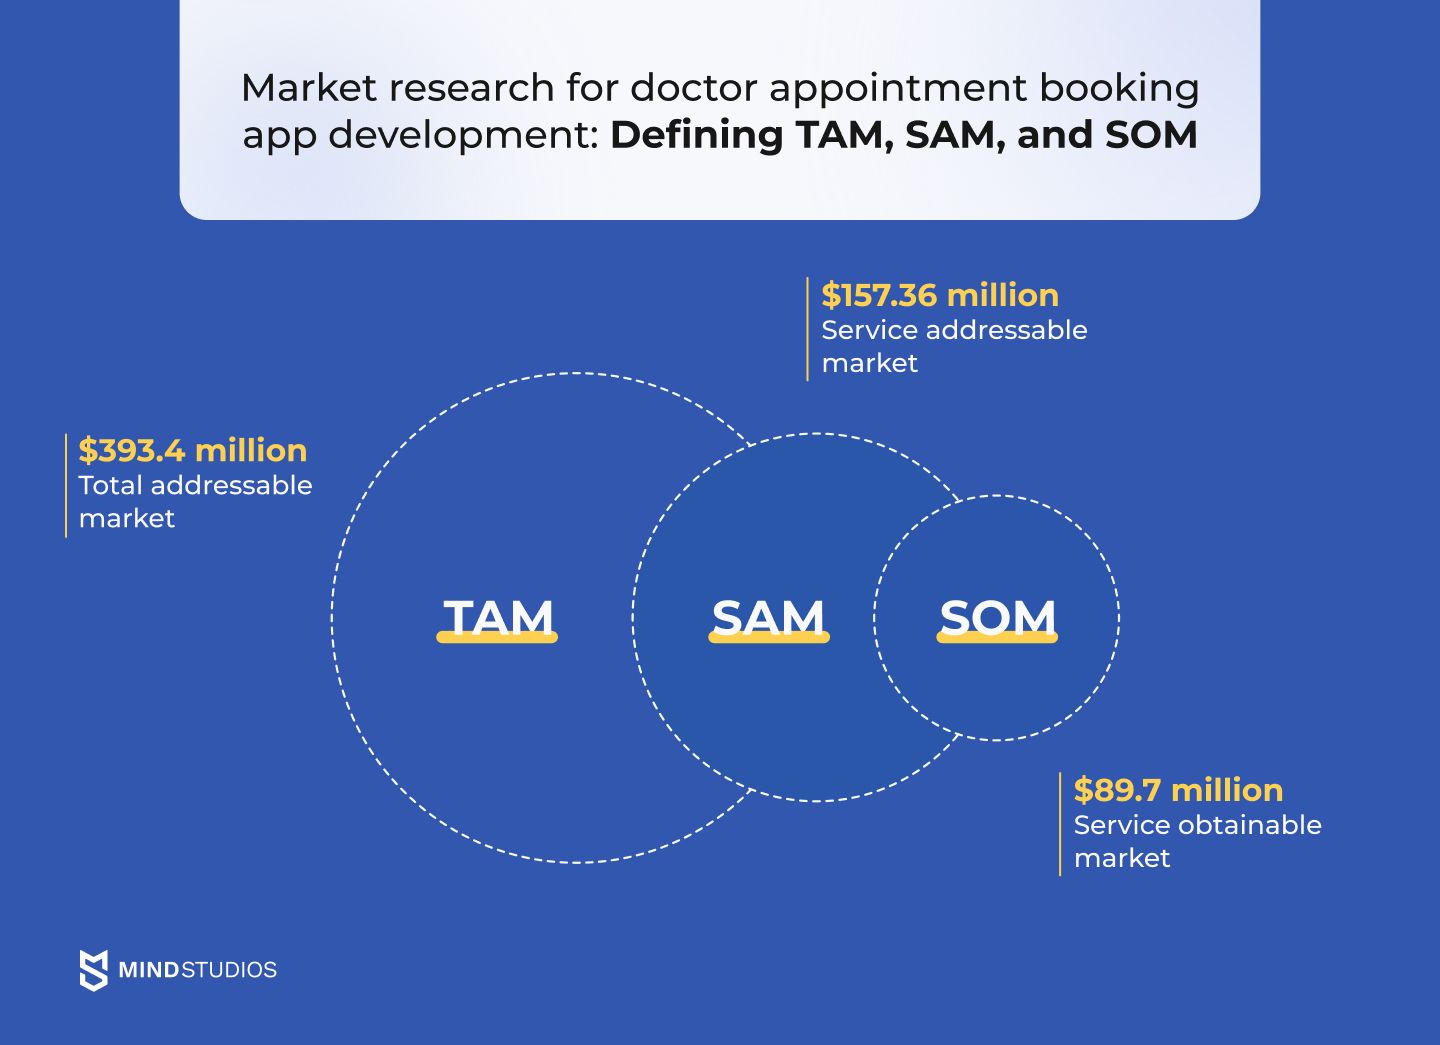 Market research for doctor appointment booking app development: Defining TAM, SAM, and SOM